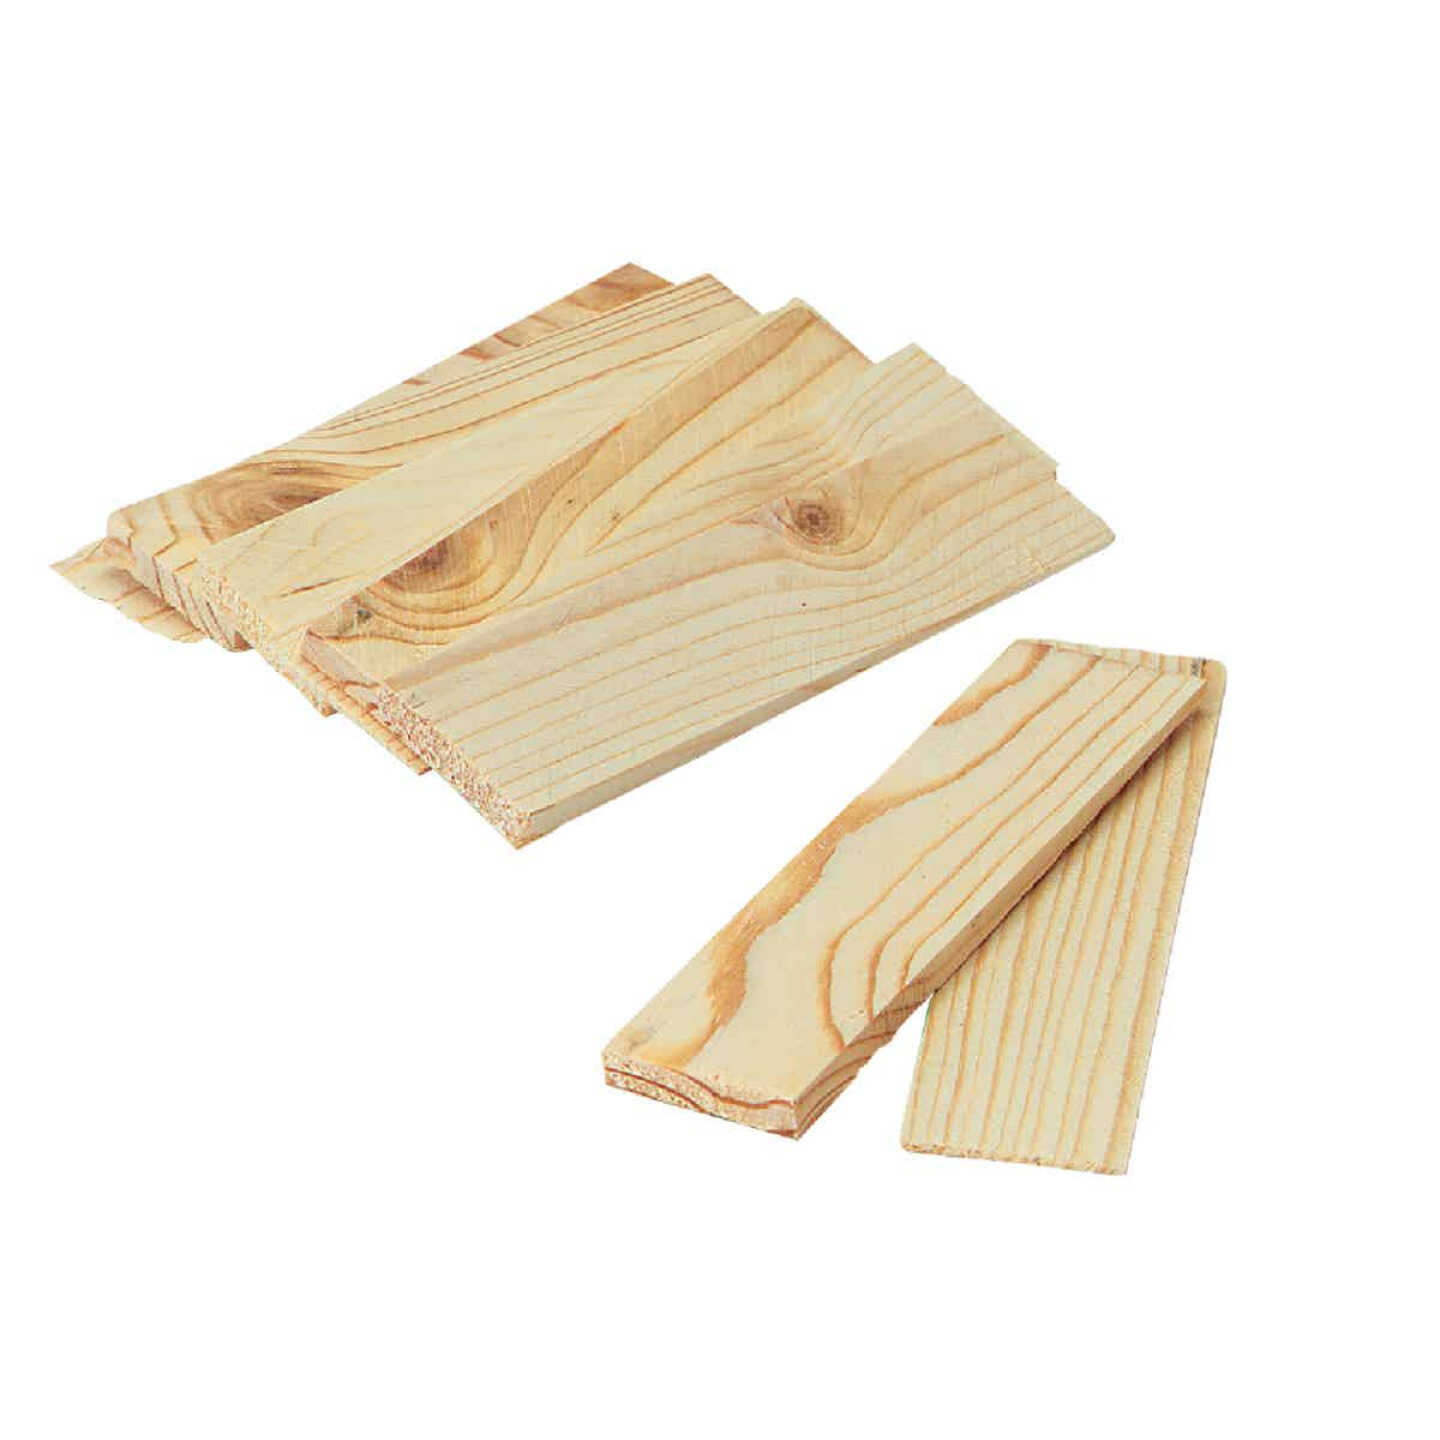 Nelson Wood Shims 6 In. L Wood Shim (9-Count) - Bender Lumber Co.